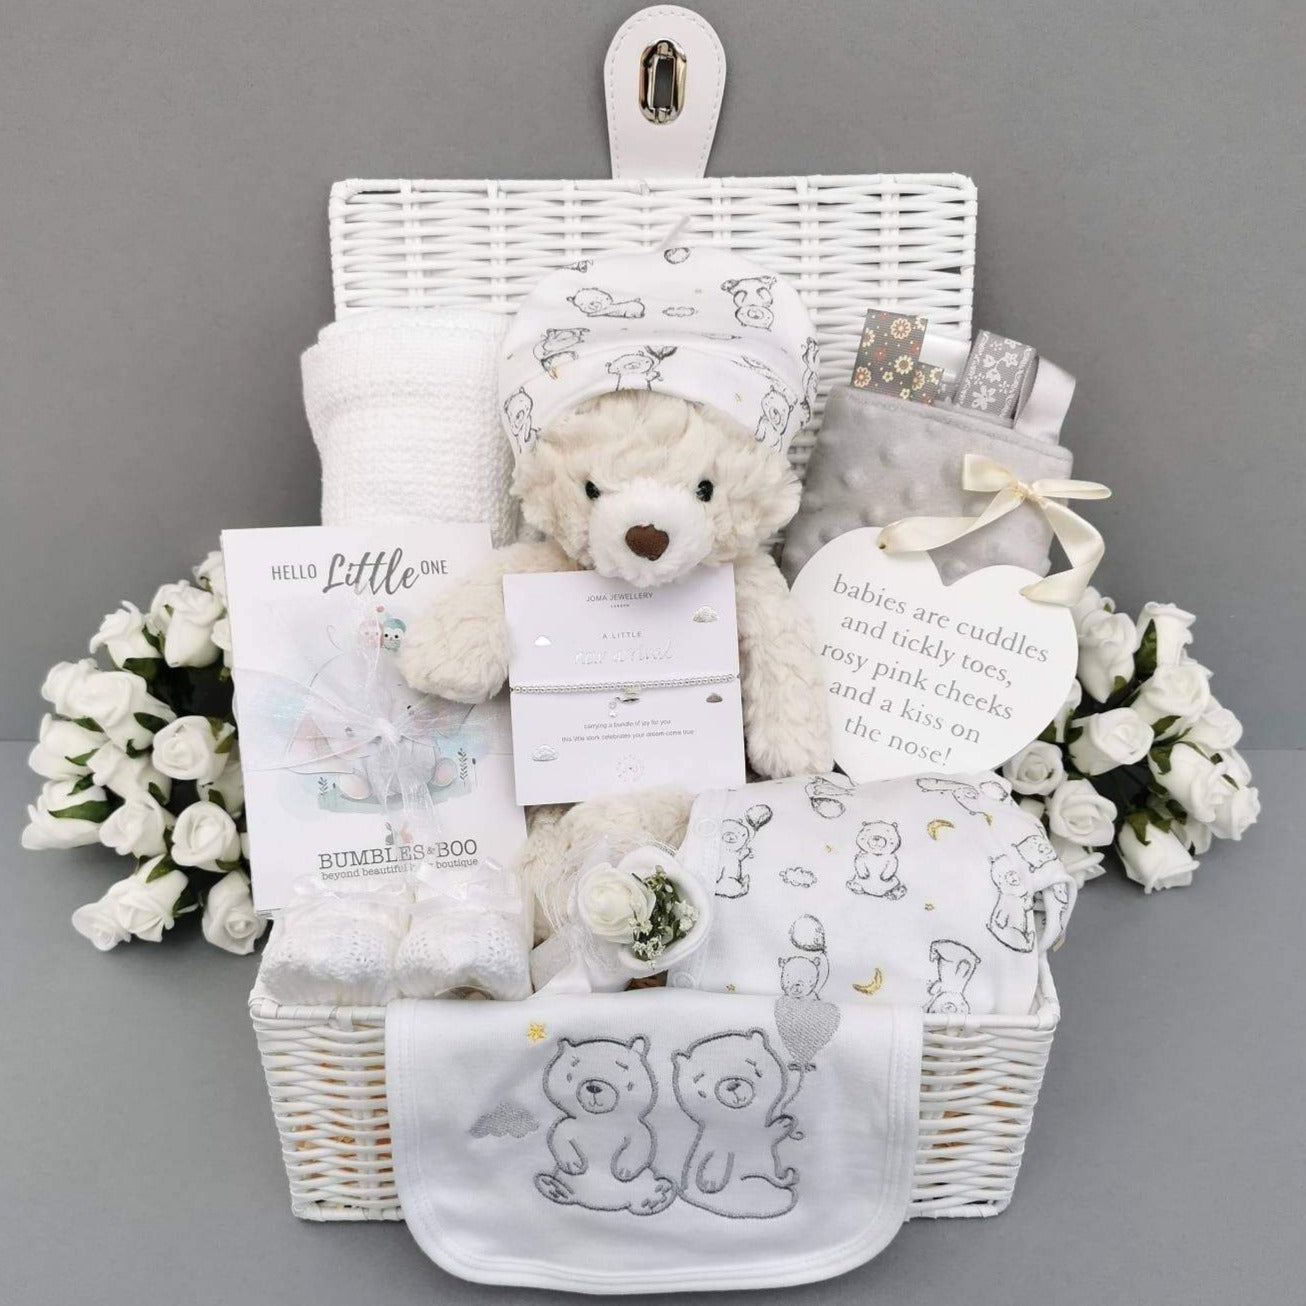 Baby hamper basket with white teddy bear, milestone cards, white cellular blanket and grey taggie blanket. White baby clothes with bear and balloon motif Unisex Baby Hamper - Bumbles and Boo